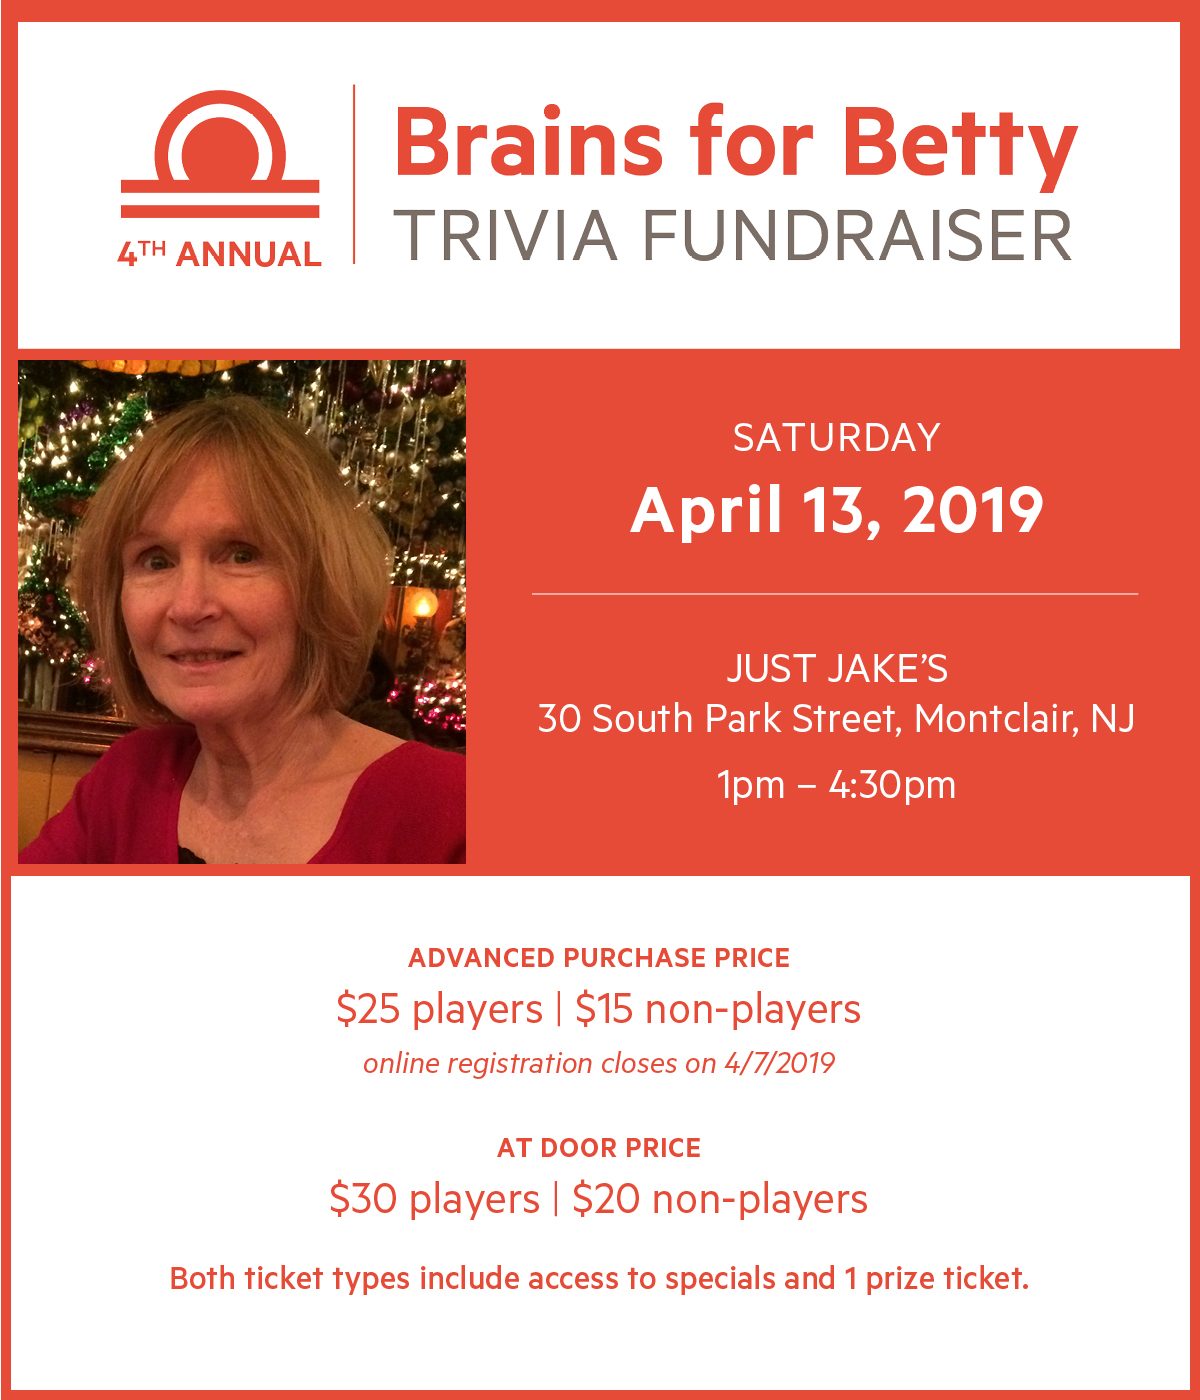 Brains for Betty_event image.jpg